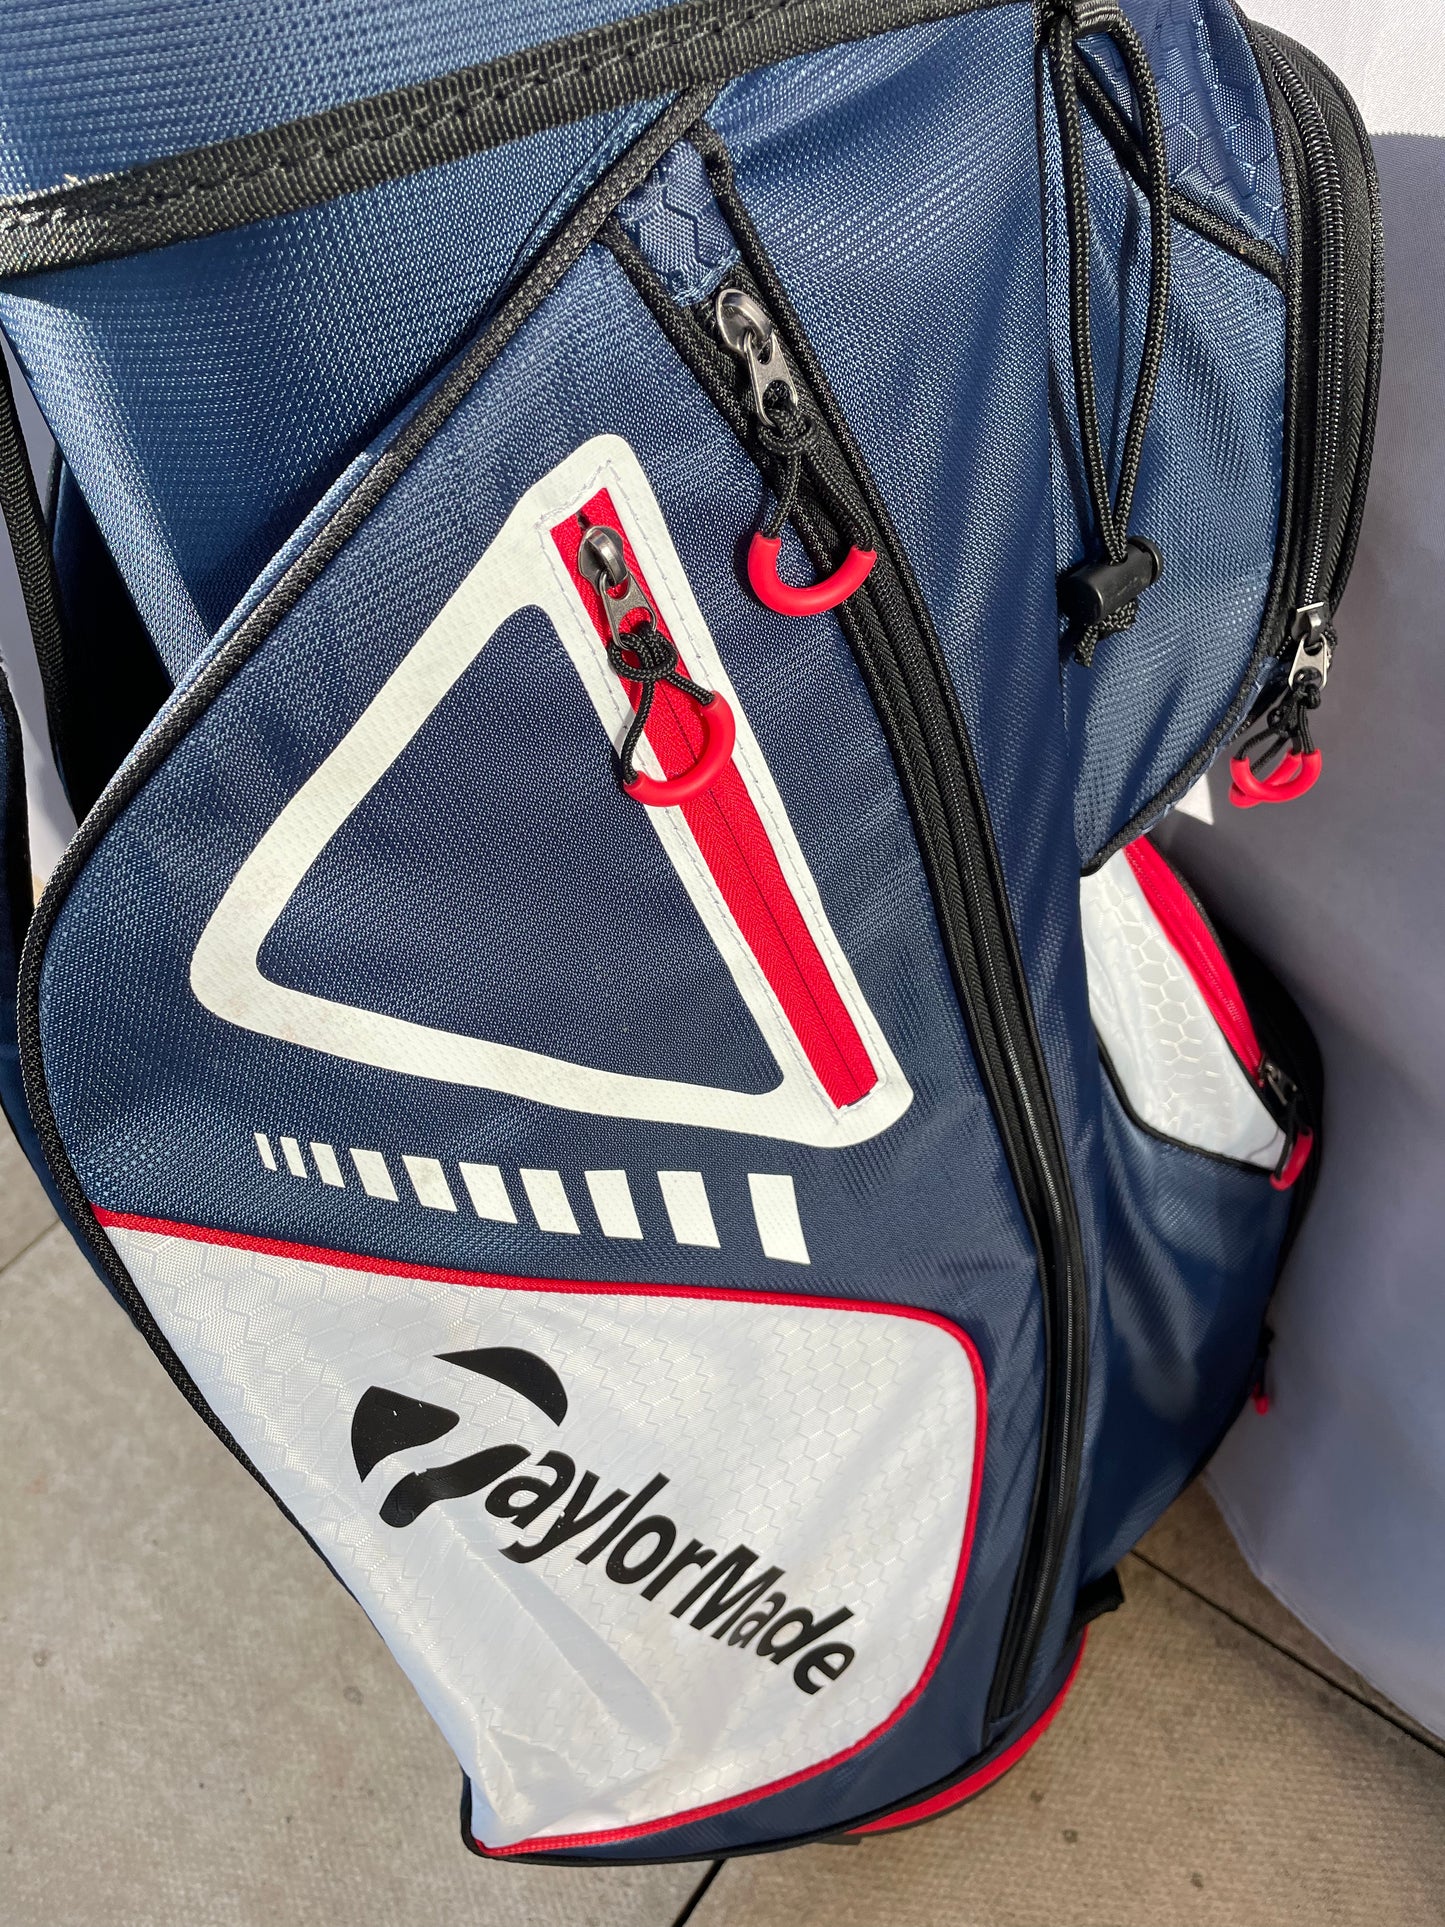 Taylormade Cart/Trolley Bag With Rain Hood - Please Read Description Before Purchasing!